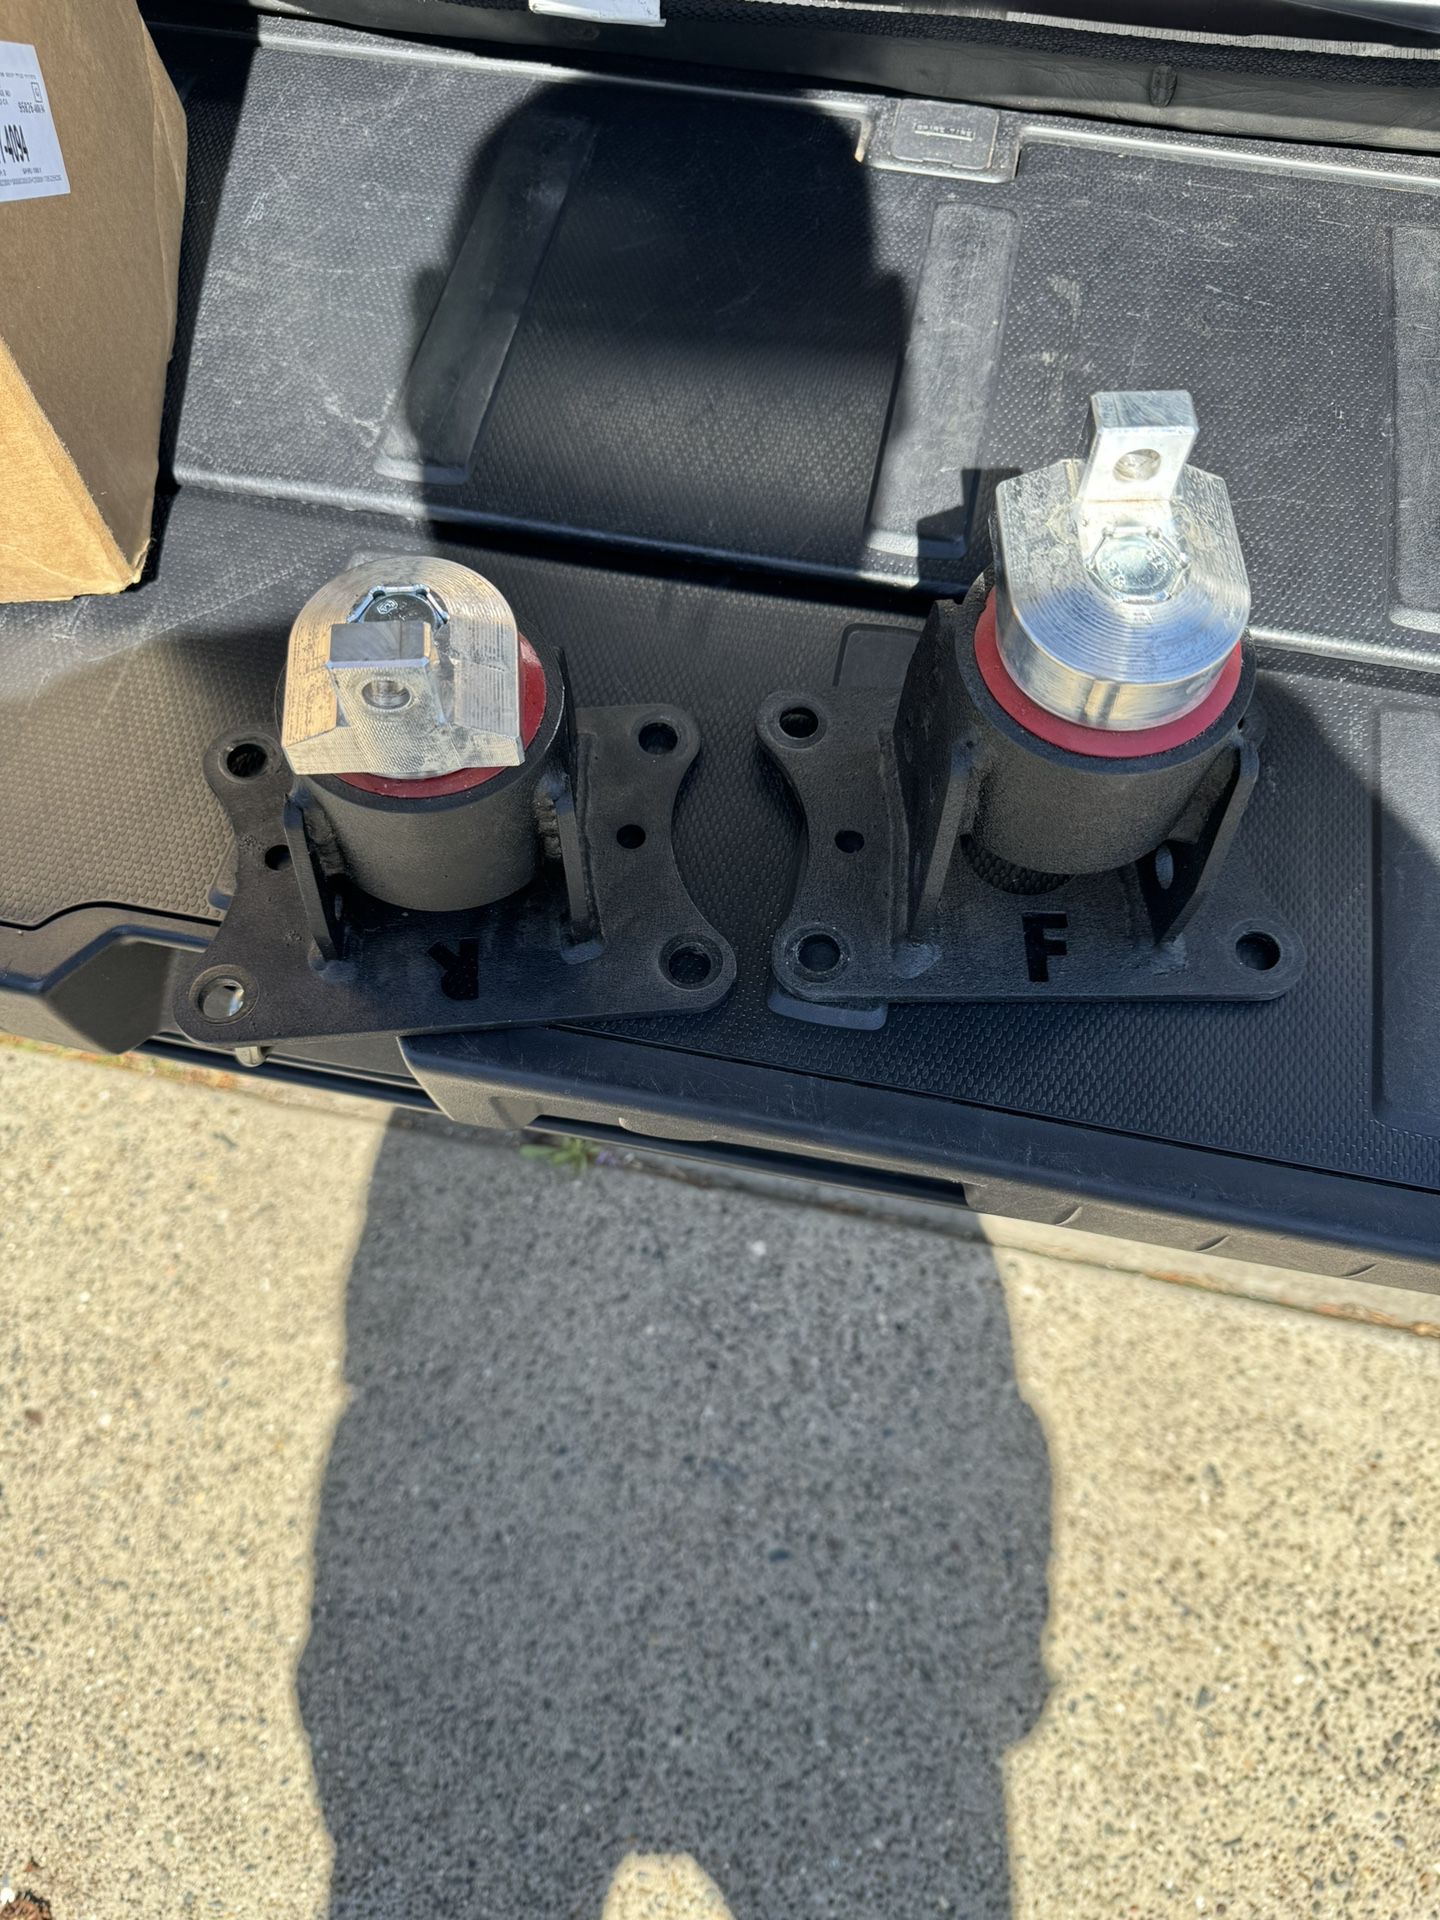 2 Engine Mounts By Innovation For A 2003-2007 Honda Accord And Acura Tsx With 2.4 Liter Engine They Have 200 Miles On Them A Little to Rigid For Me